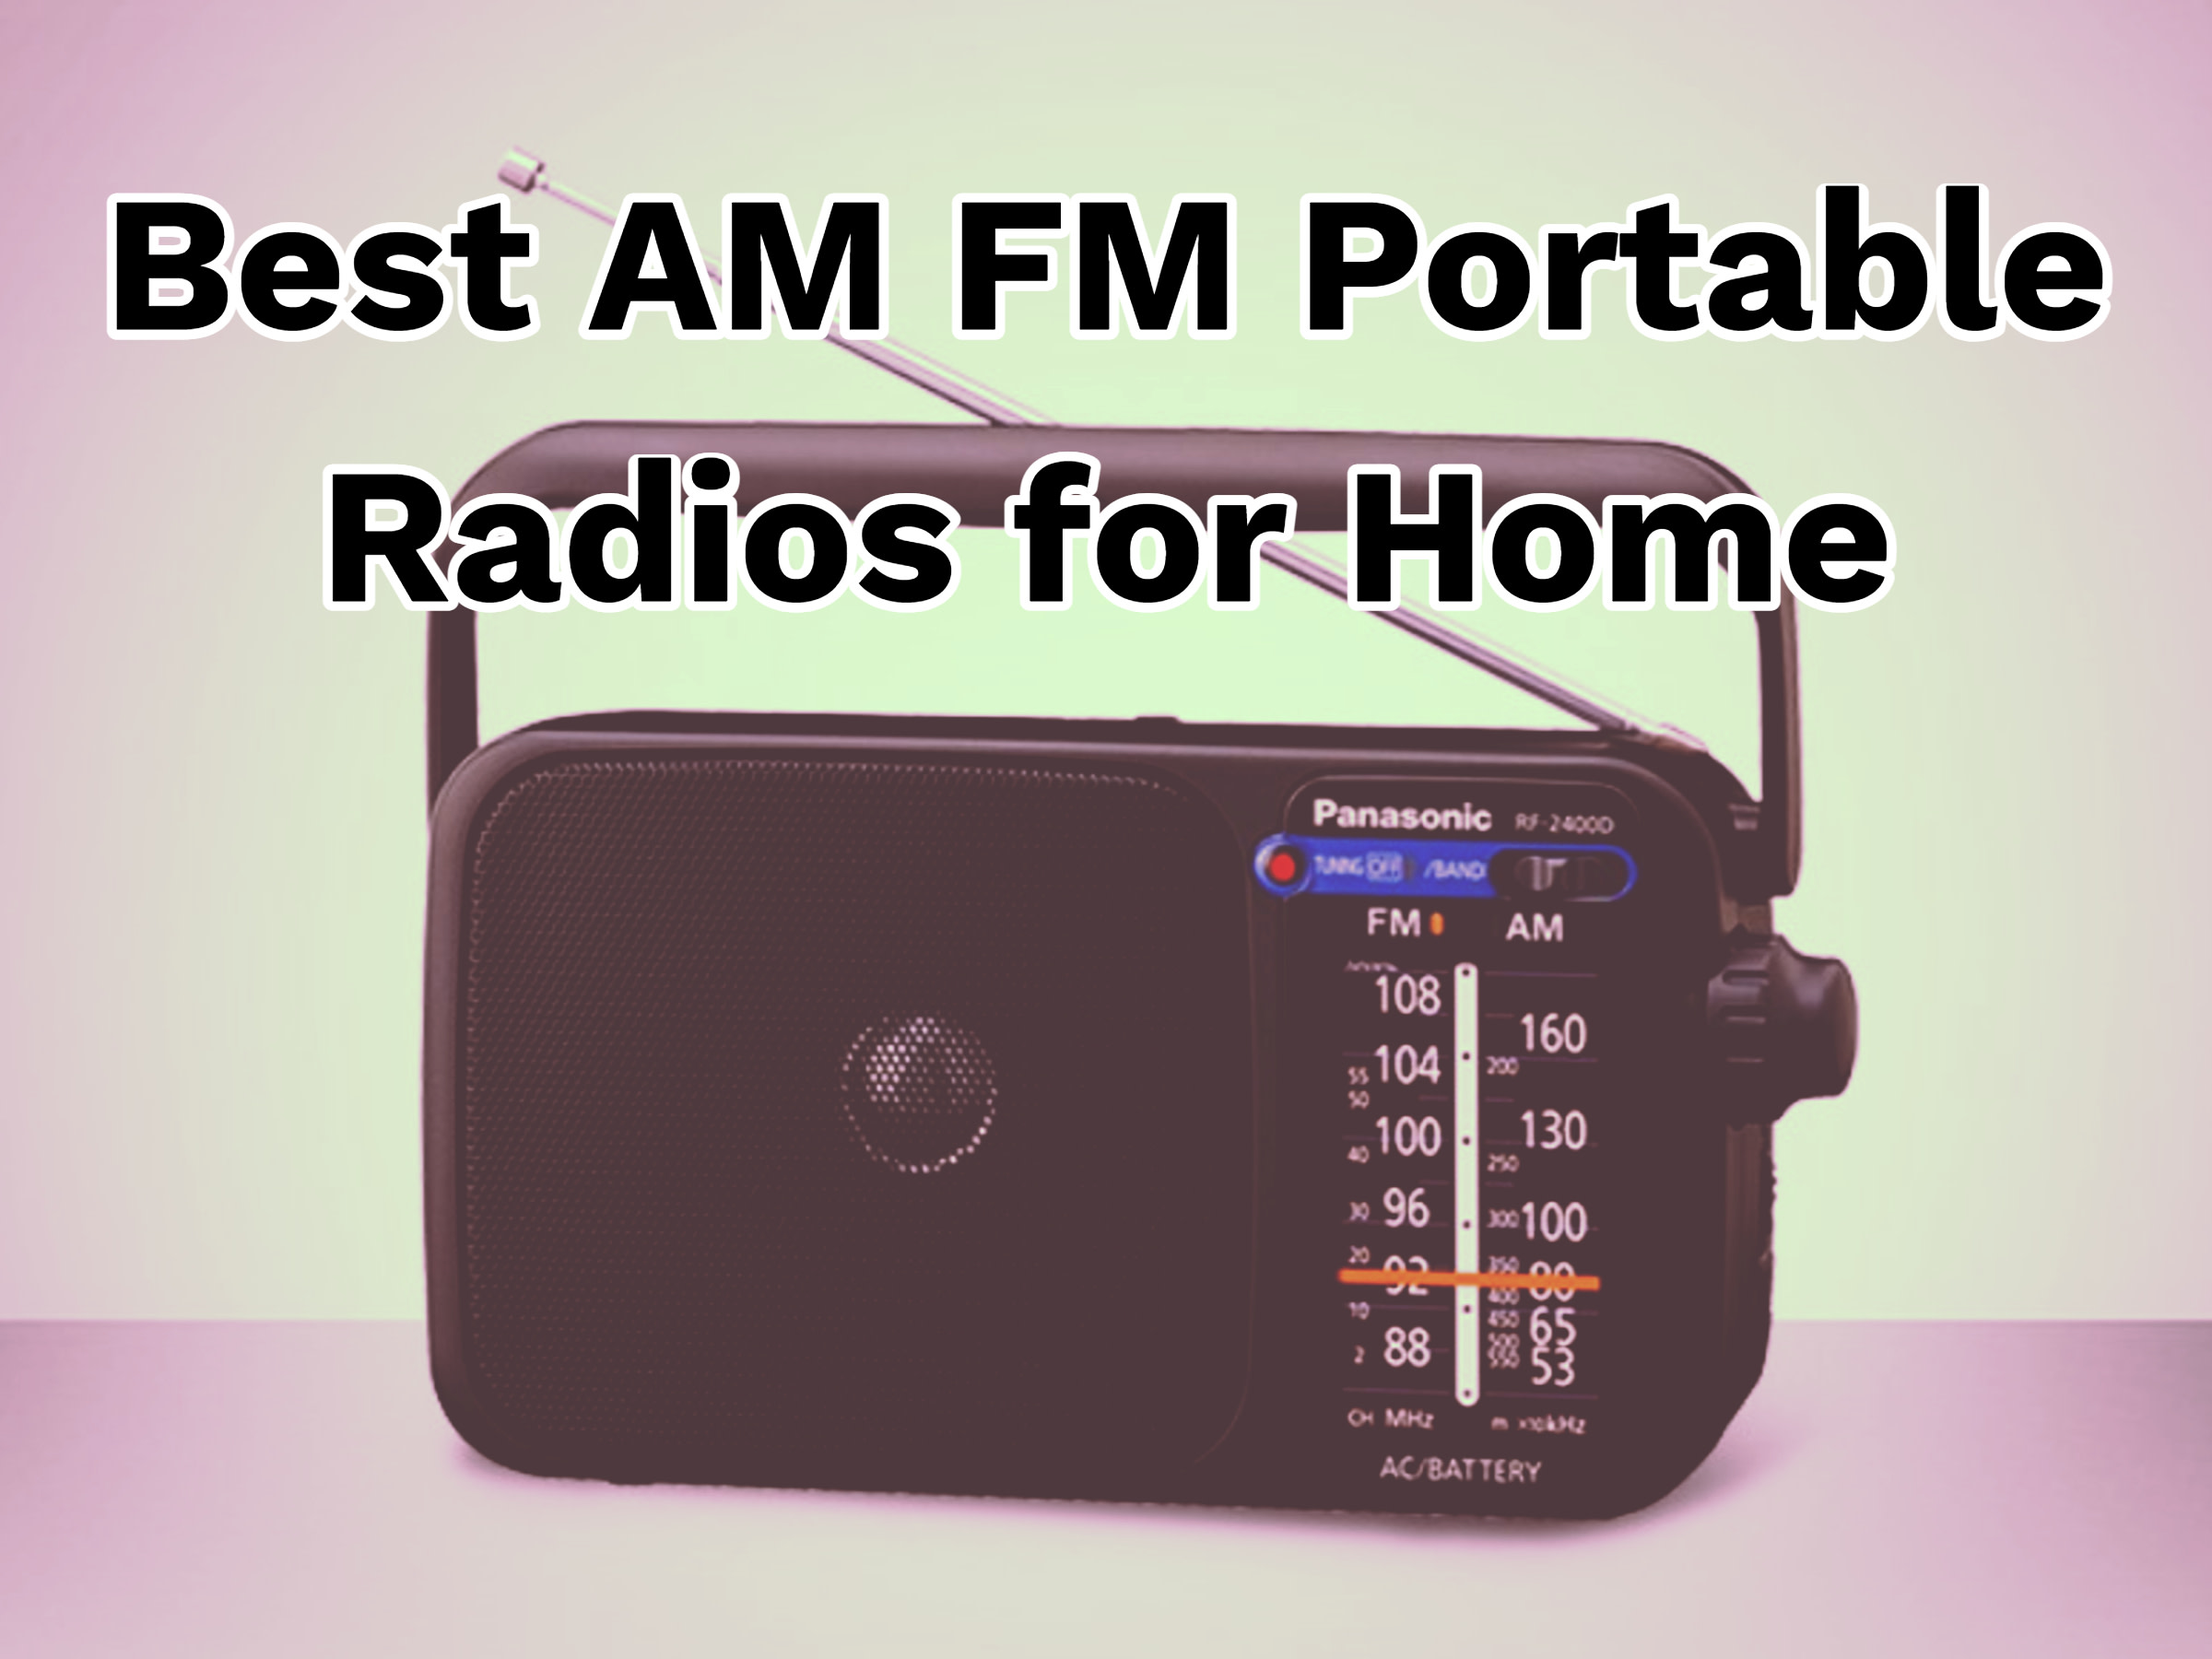 Best AM FM Portable Radios for Home